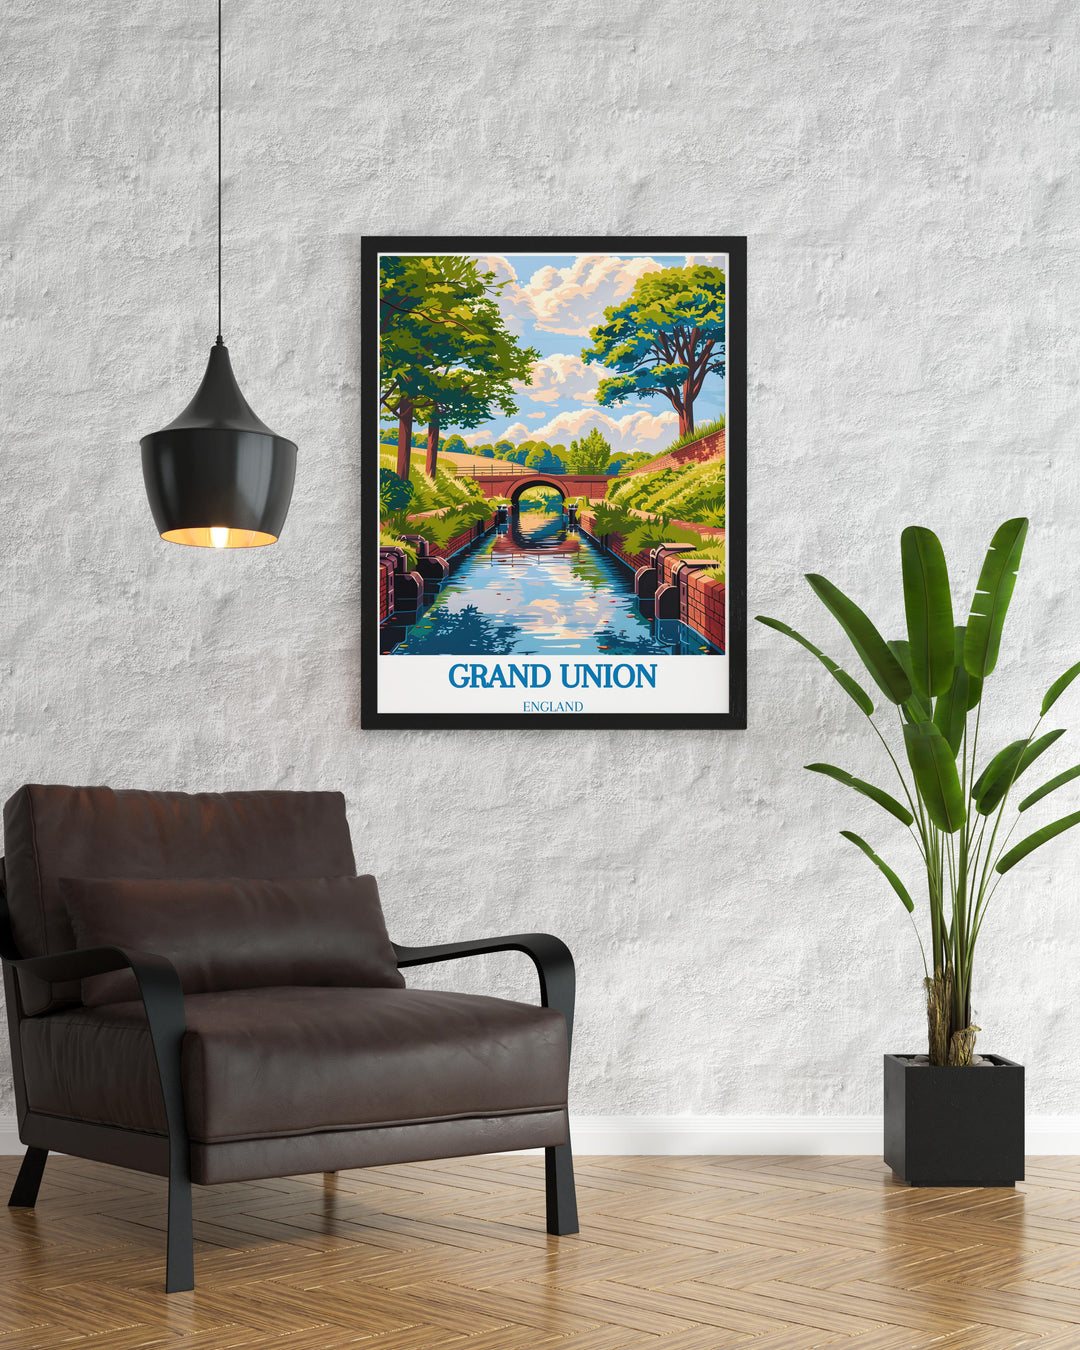 Nostalgic travel poster featuring the Grand Union Canal and its iconic narrowboats, capturing the essence of traditional British canal life.